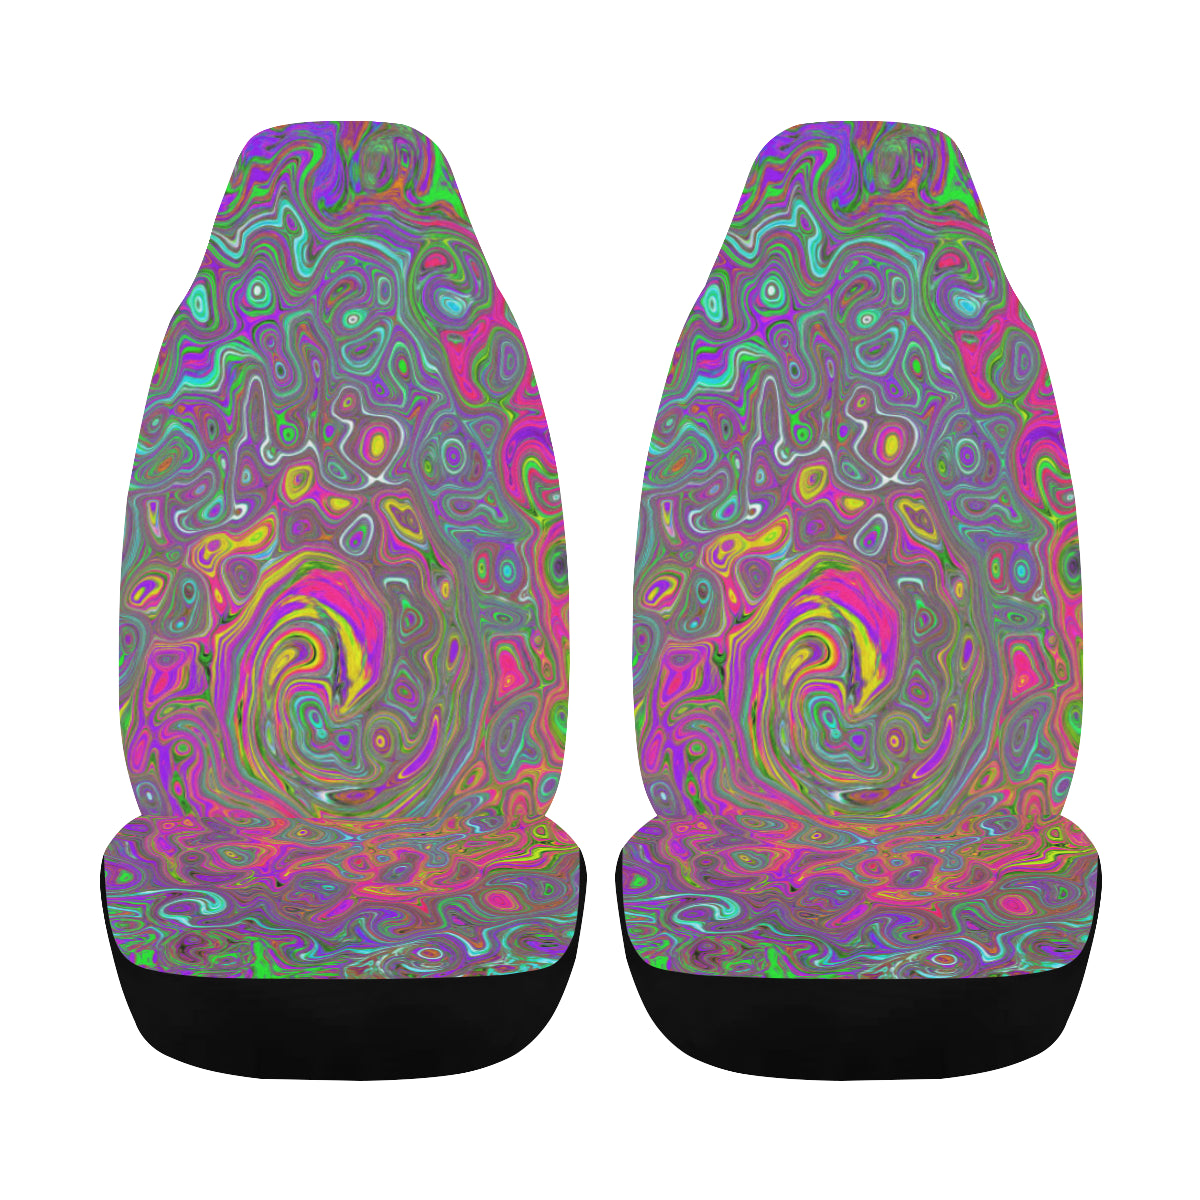 Car Seat Covers, Trippy Hot Pink Abstract Retro Liquid Swirl